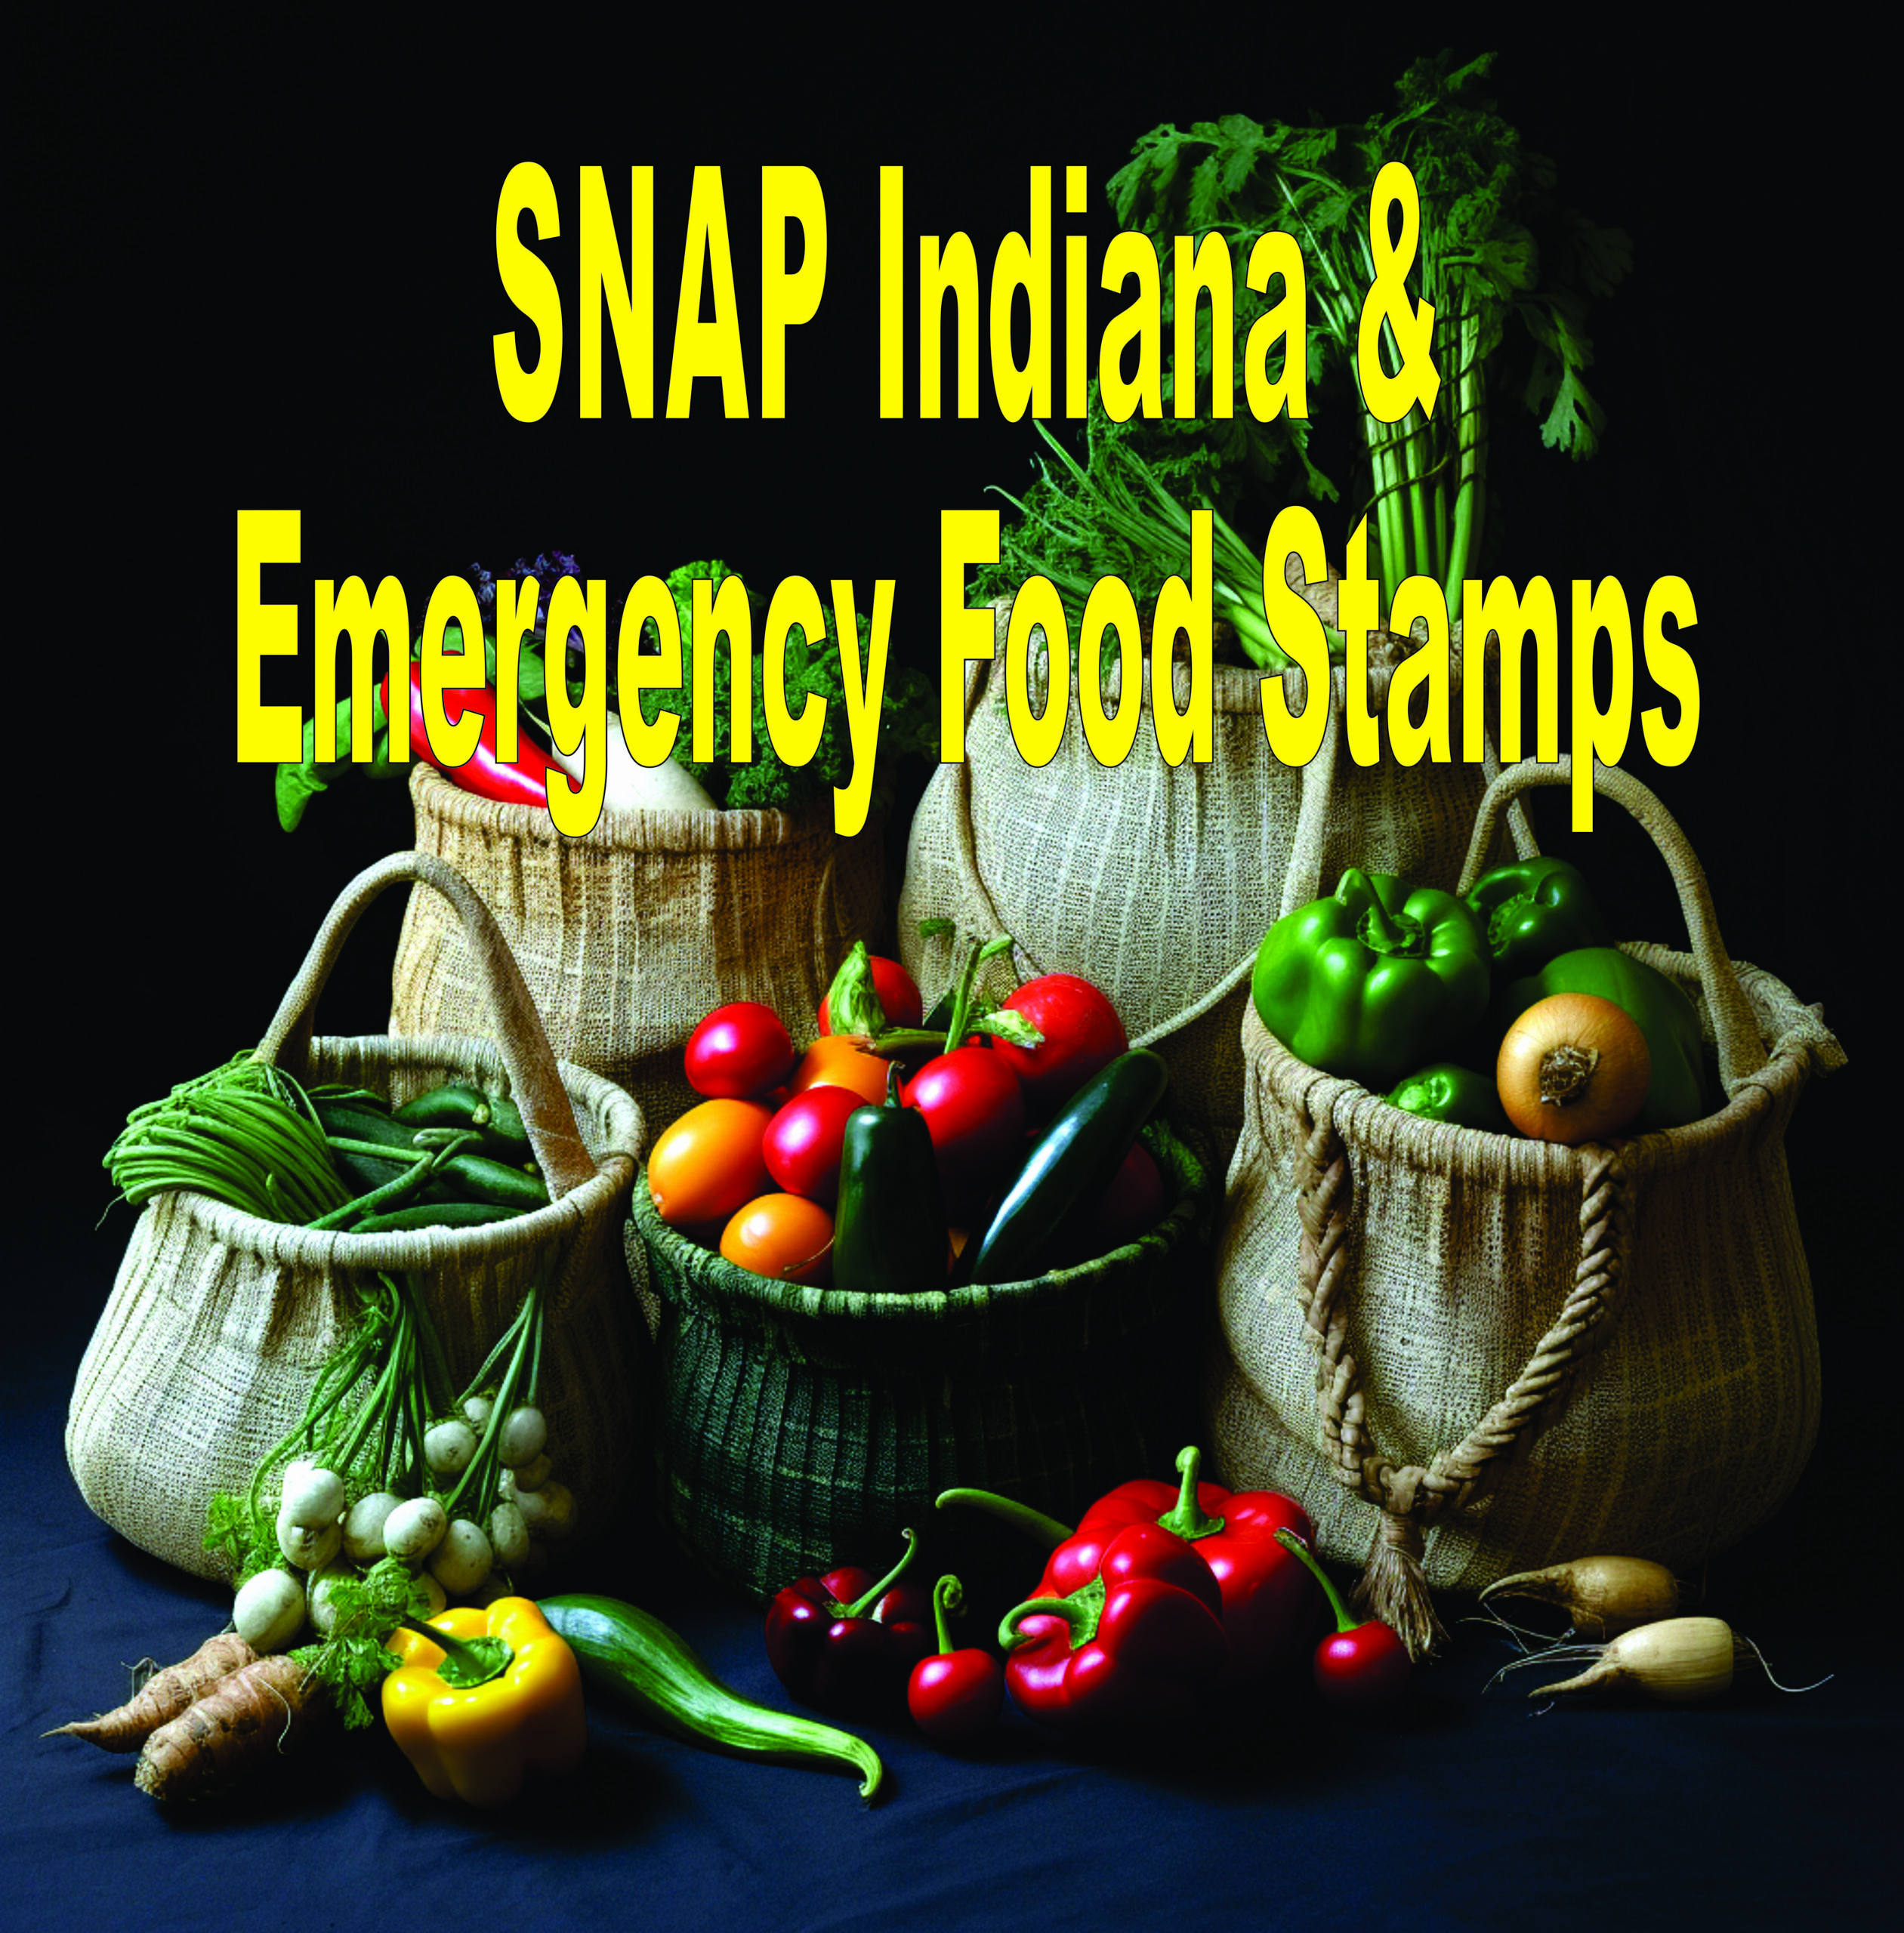 Snap Indiana & Emergency Food Stamps